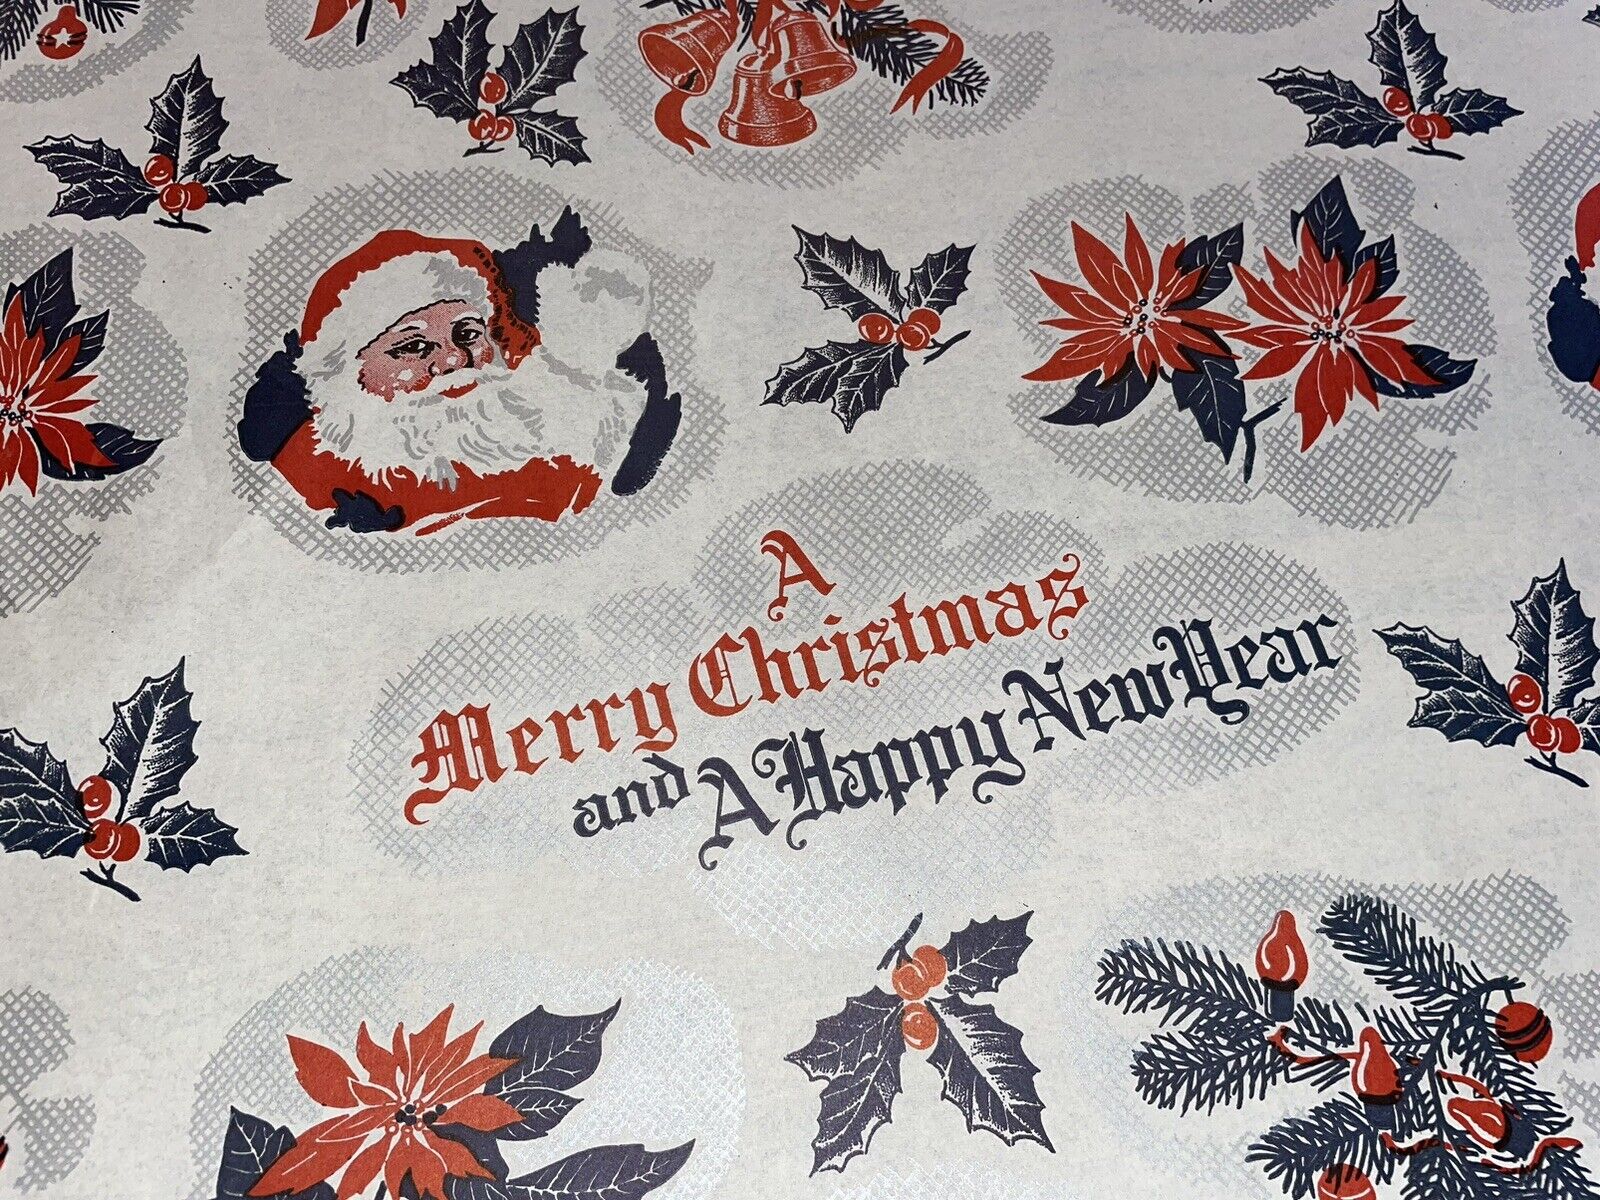 VTG MERRY CHRISTMAS WRAPPING PAPER GIFT WRAP SANTA HOLLY BELLS HAPPY NEW YEAR